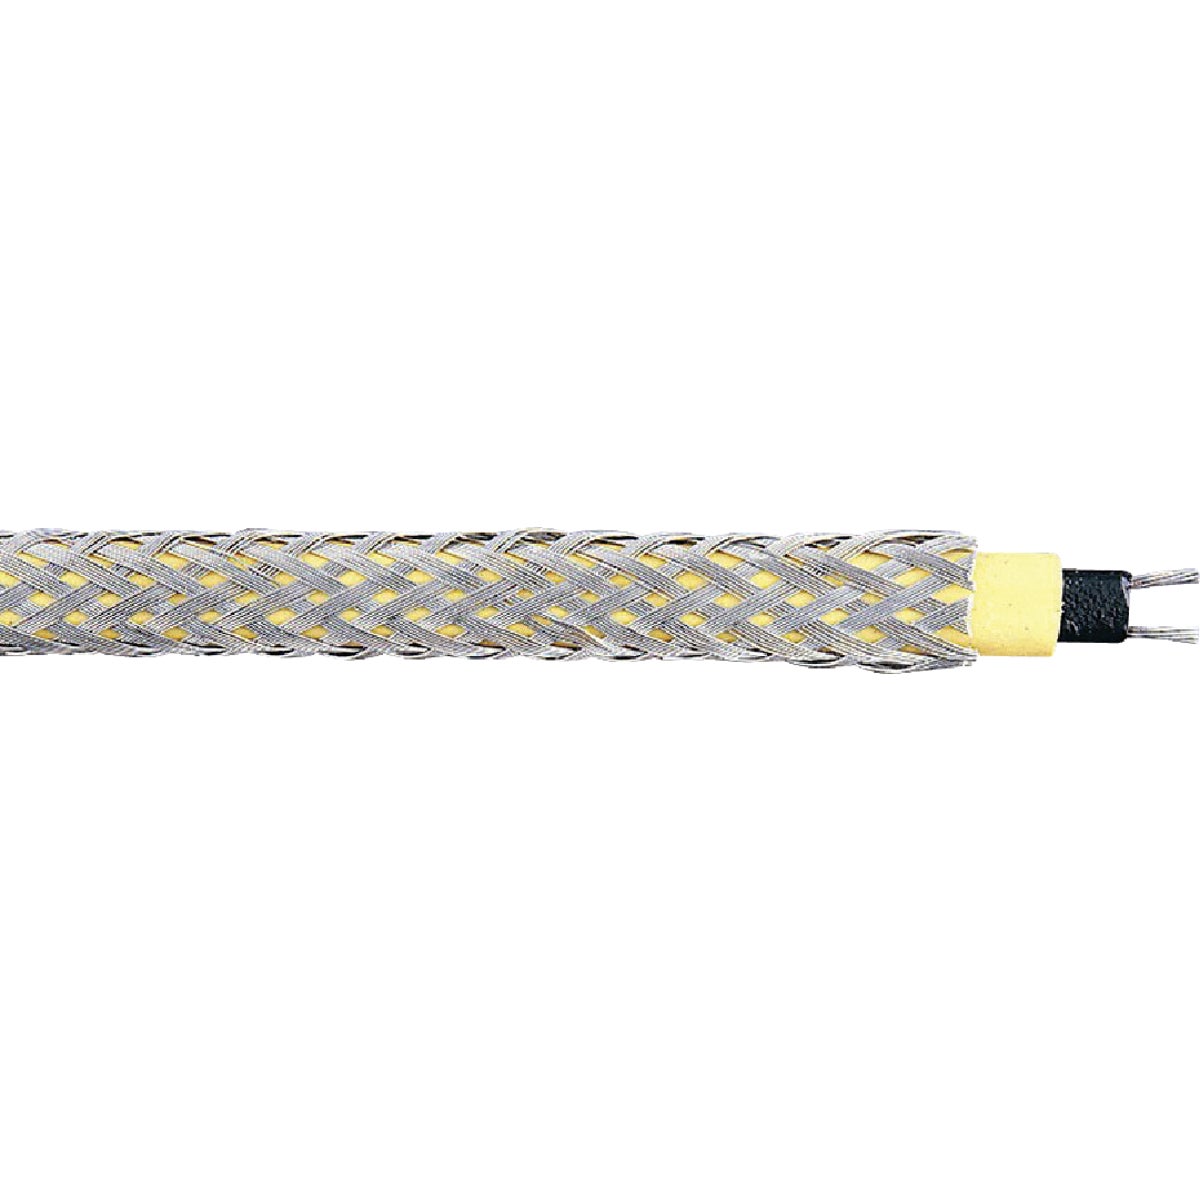 Item 544744, Freeze Free self-regulating heating cable produces only the heat that is 